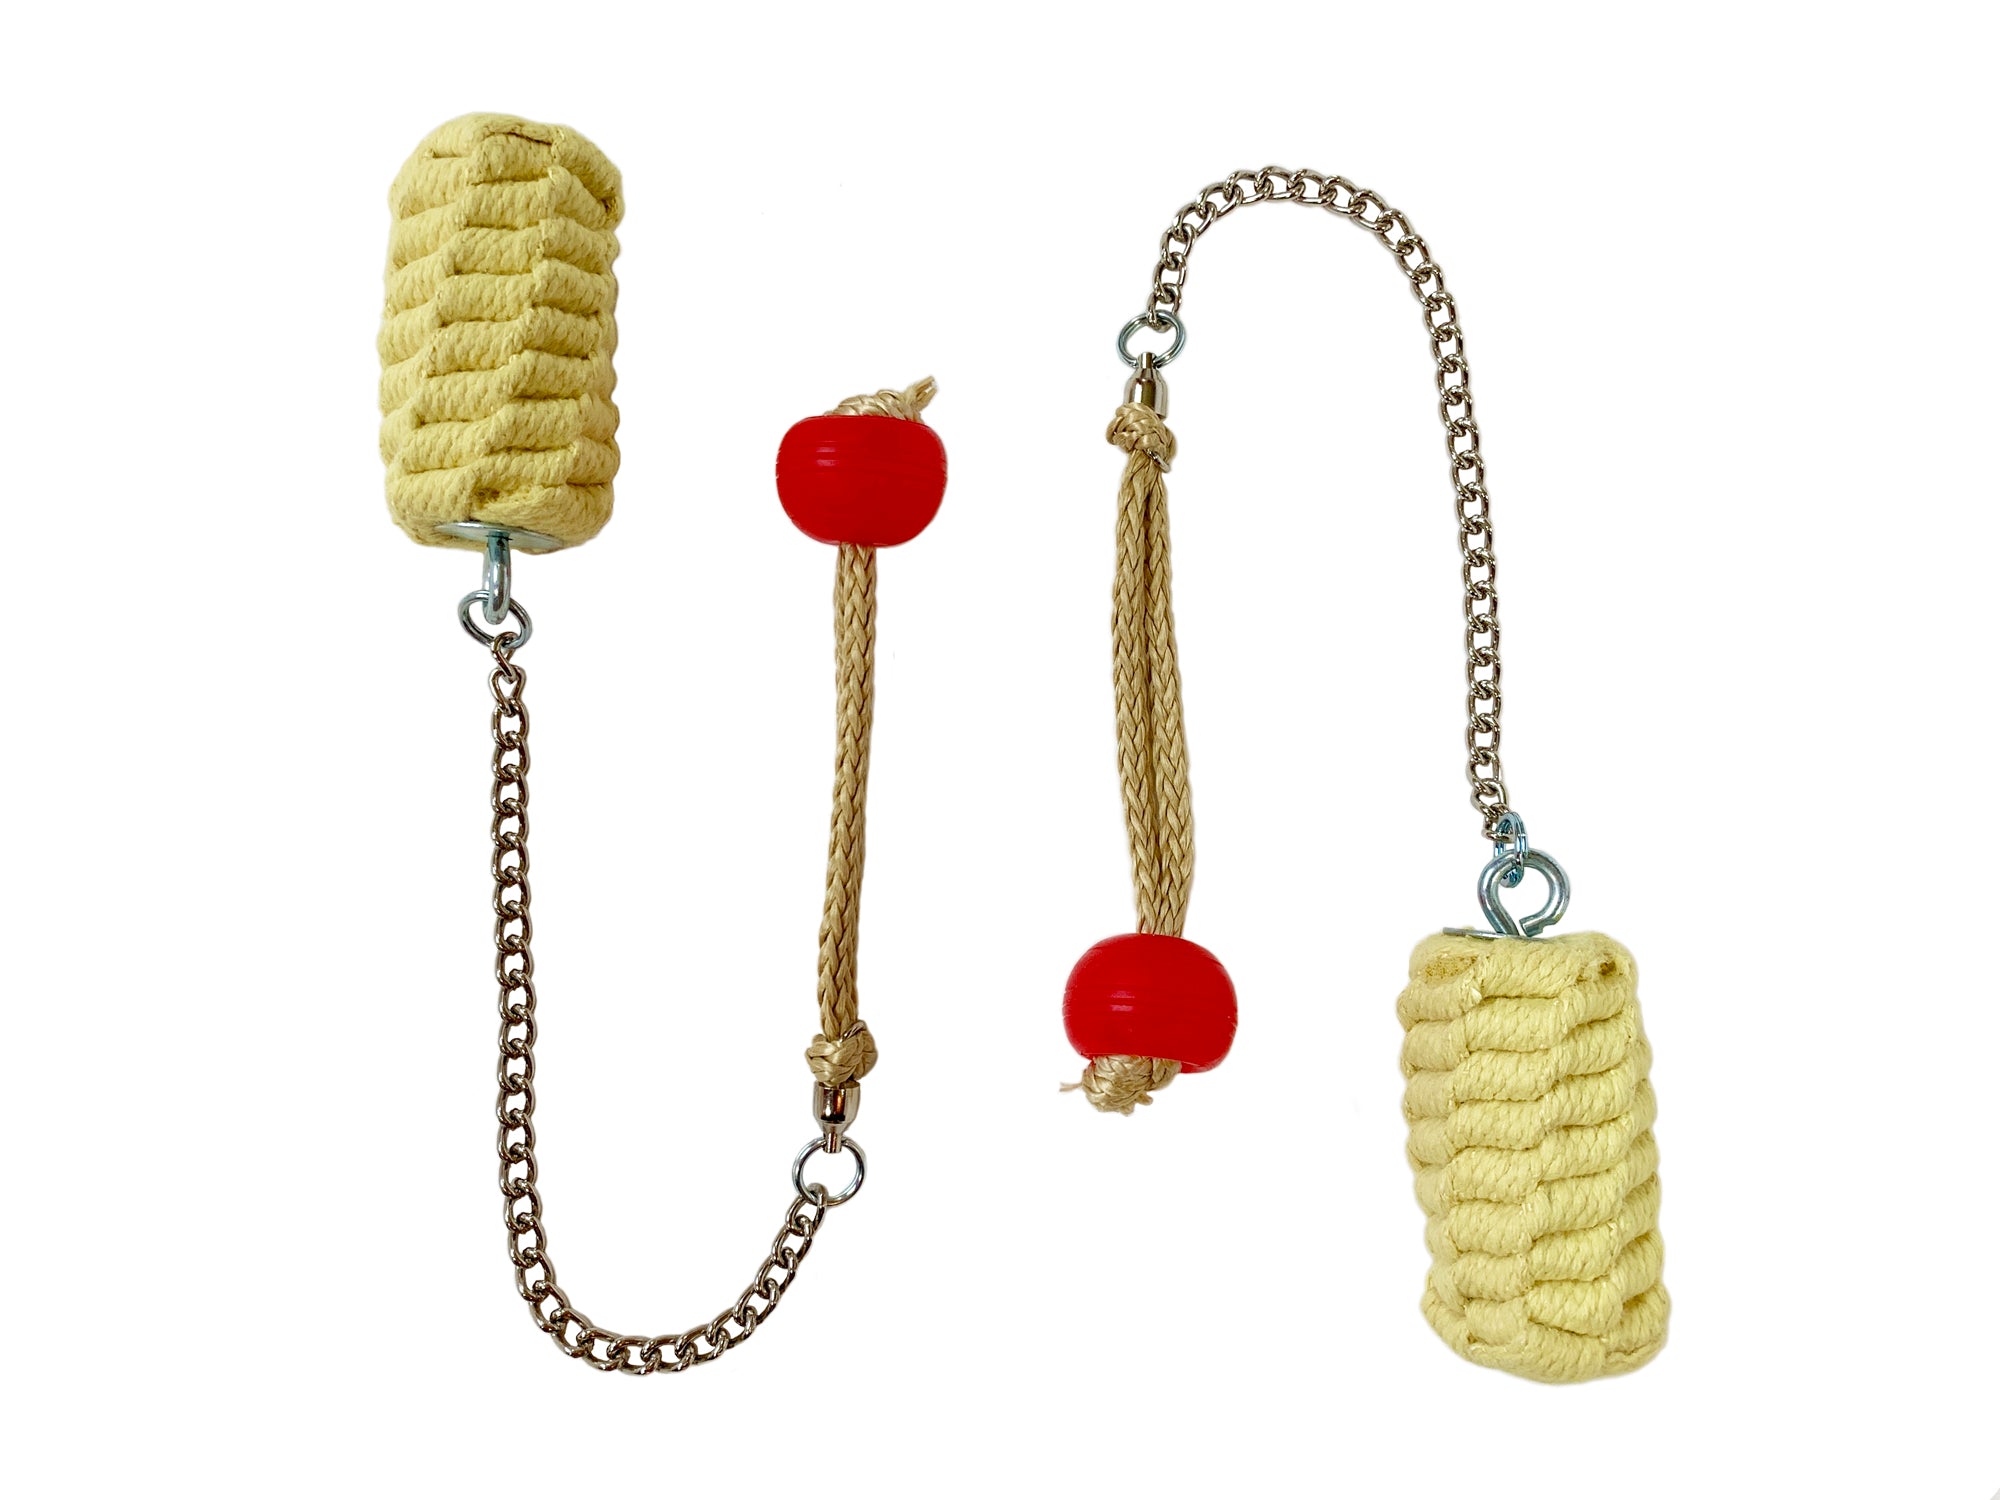 Our Poi were designed w/ a minimalist's approach, eliminating bulky & unnecessary hardware. Super lightweight bullet style Poi heads on smooth twist-link chain that won't catch on clothing or skin, and no exposed metal on wick underside, helping to prevent hot metal burns. 100% Silicone PomGrip knob-style handles on soft fireproof Technora rope. Add common 3/4" washers to customize the weight of your handles. 